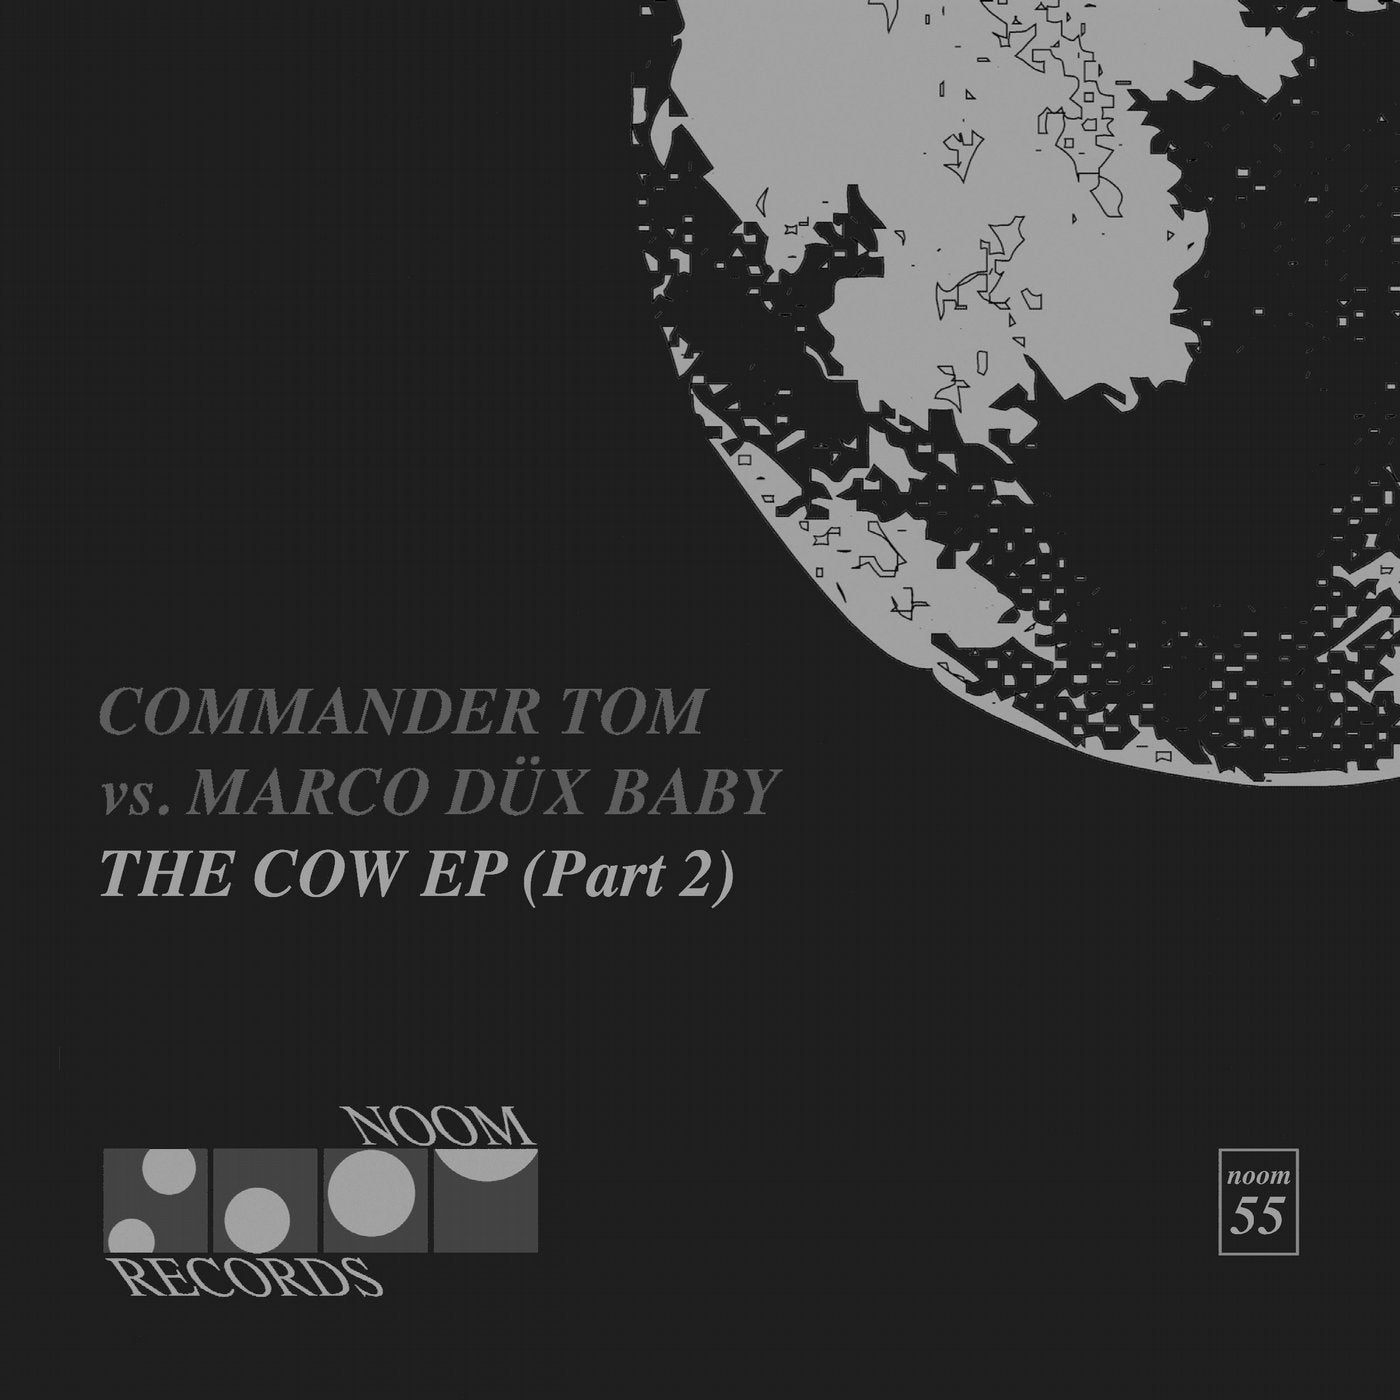 The Cow EP (Part 2)